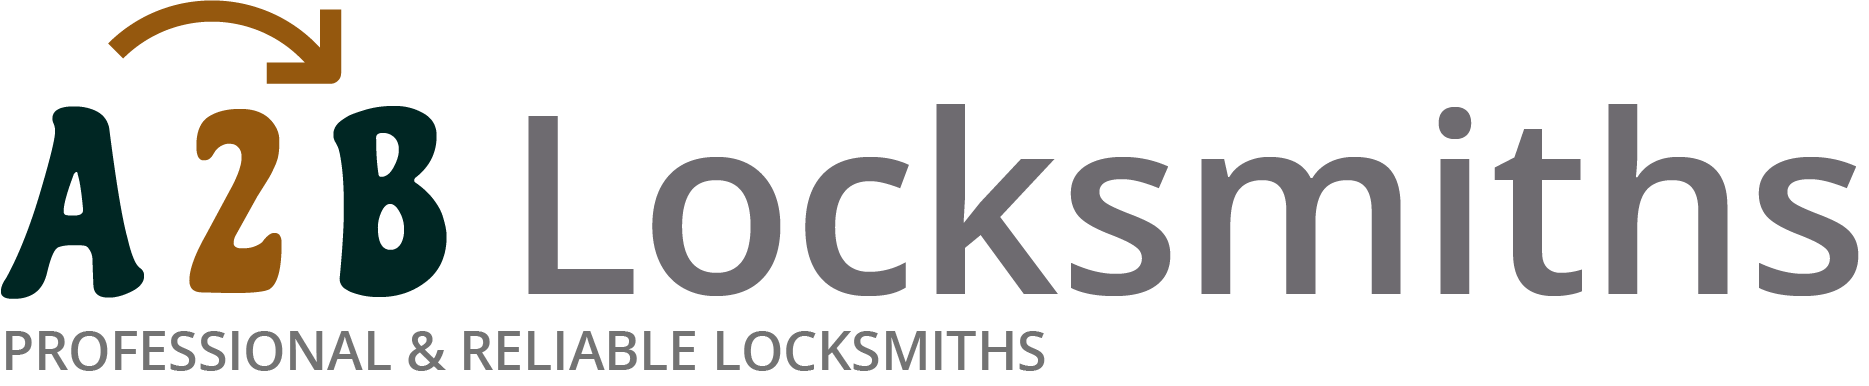 If you are locked out of house in Wisbech, our 24/7 local emergency locksmith services can help you.